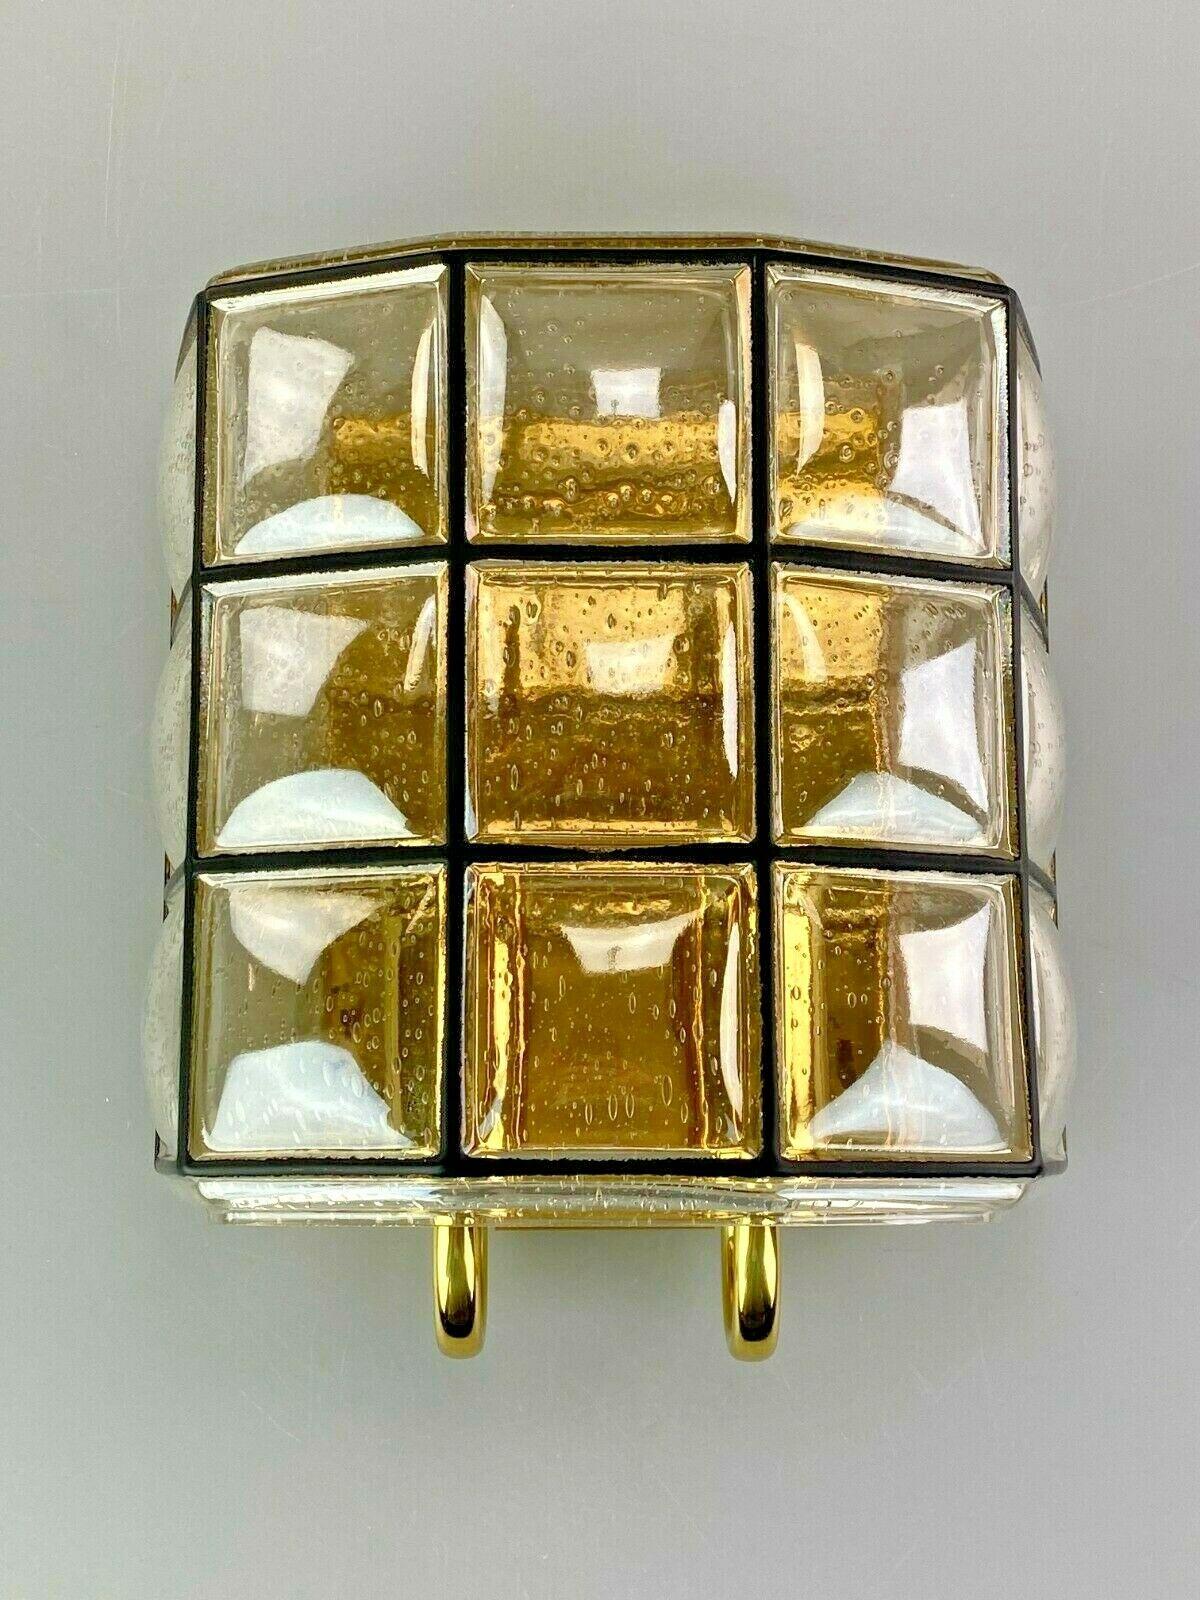 60s 70s lamp light wall lamp wall light Limburg Space Age Design 60s

Object: wall lamp

Manufacturer: Glashütte Limburg 3131

Condition: good

Age: around 1960-1970

Dimensions:

21cm x 24cm x 11.5cm

Other notes:

The pictures